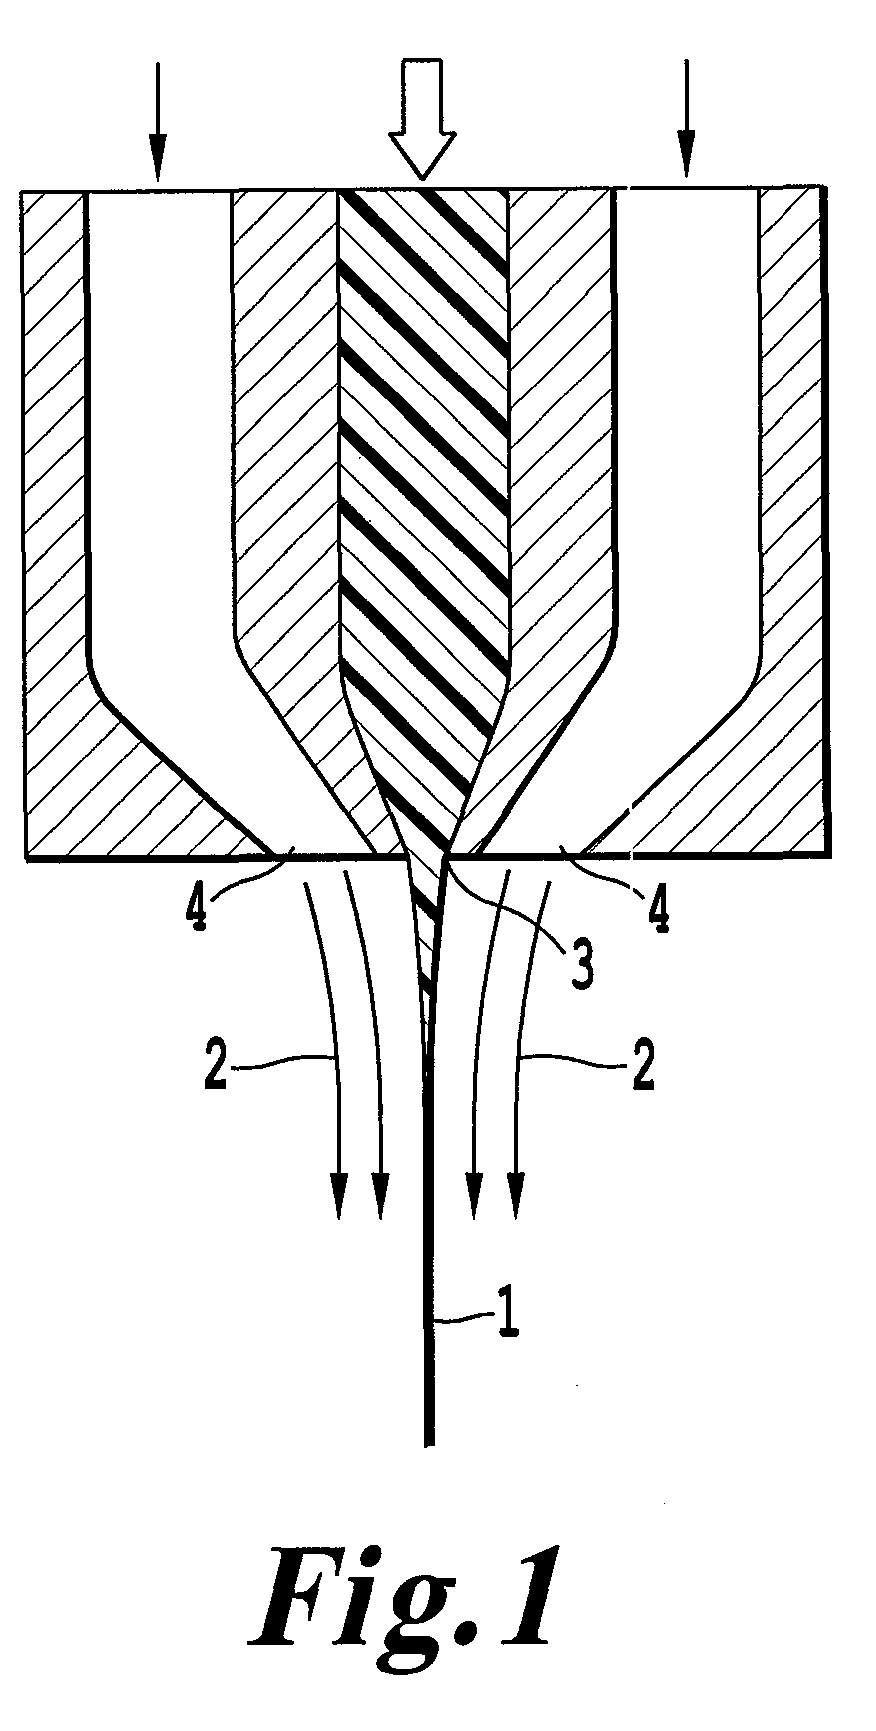 Electrolyte membrane for polymer electrolyte fuel cells, process for its production and membrane-electrode assembly for polymer electrolyte fuel cells